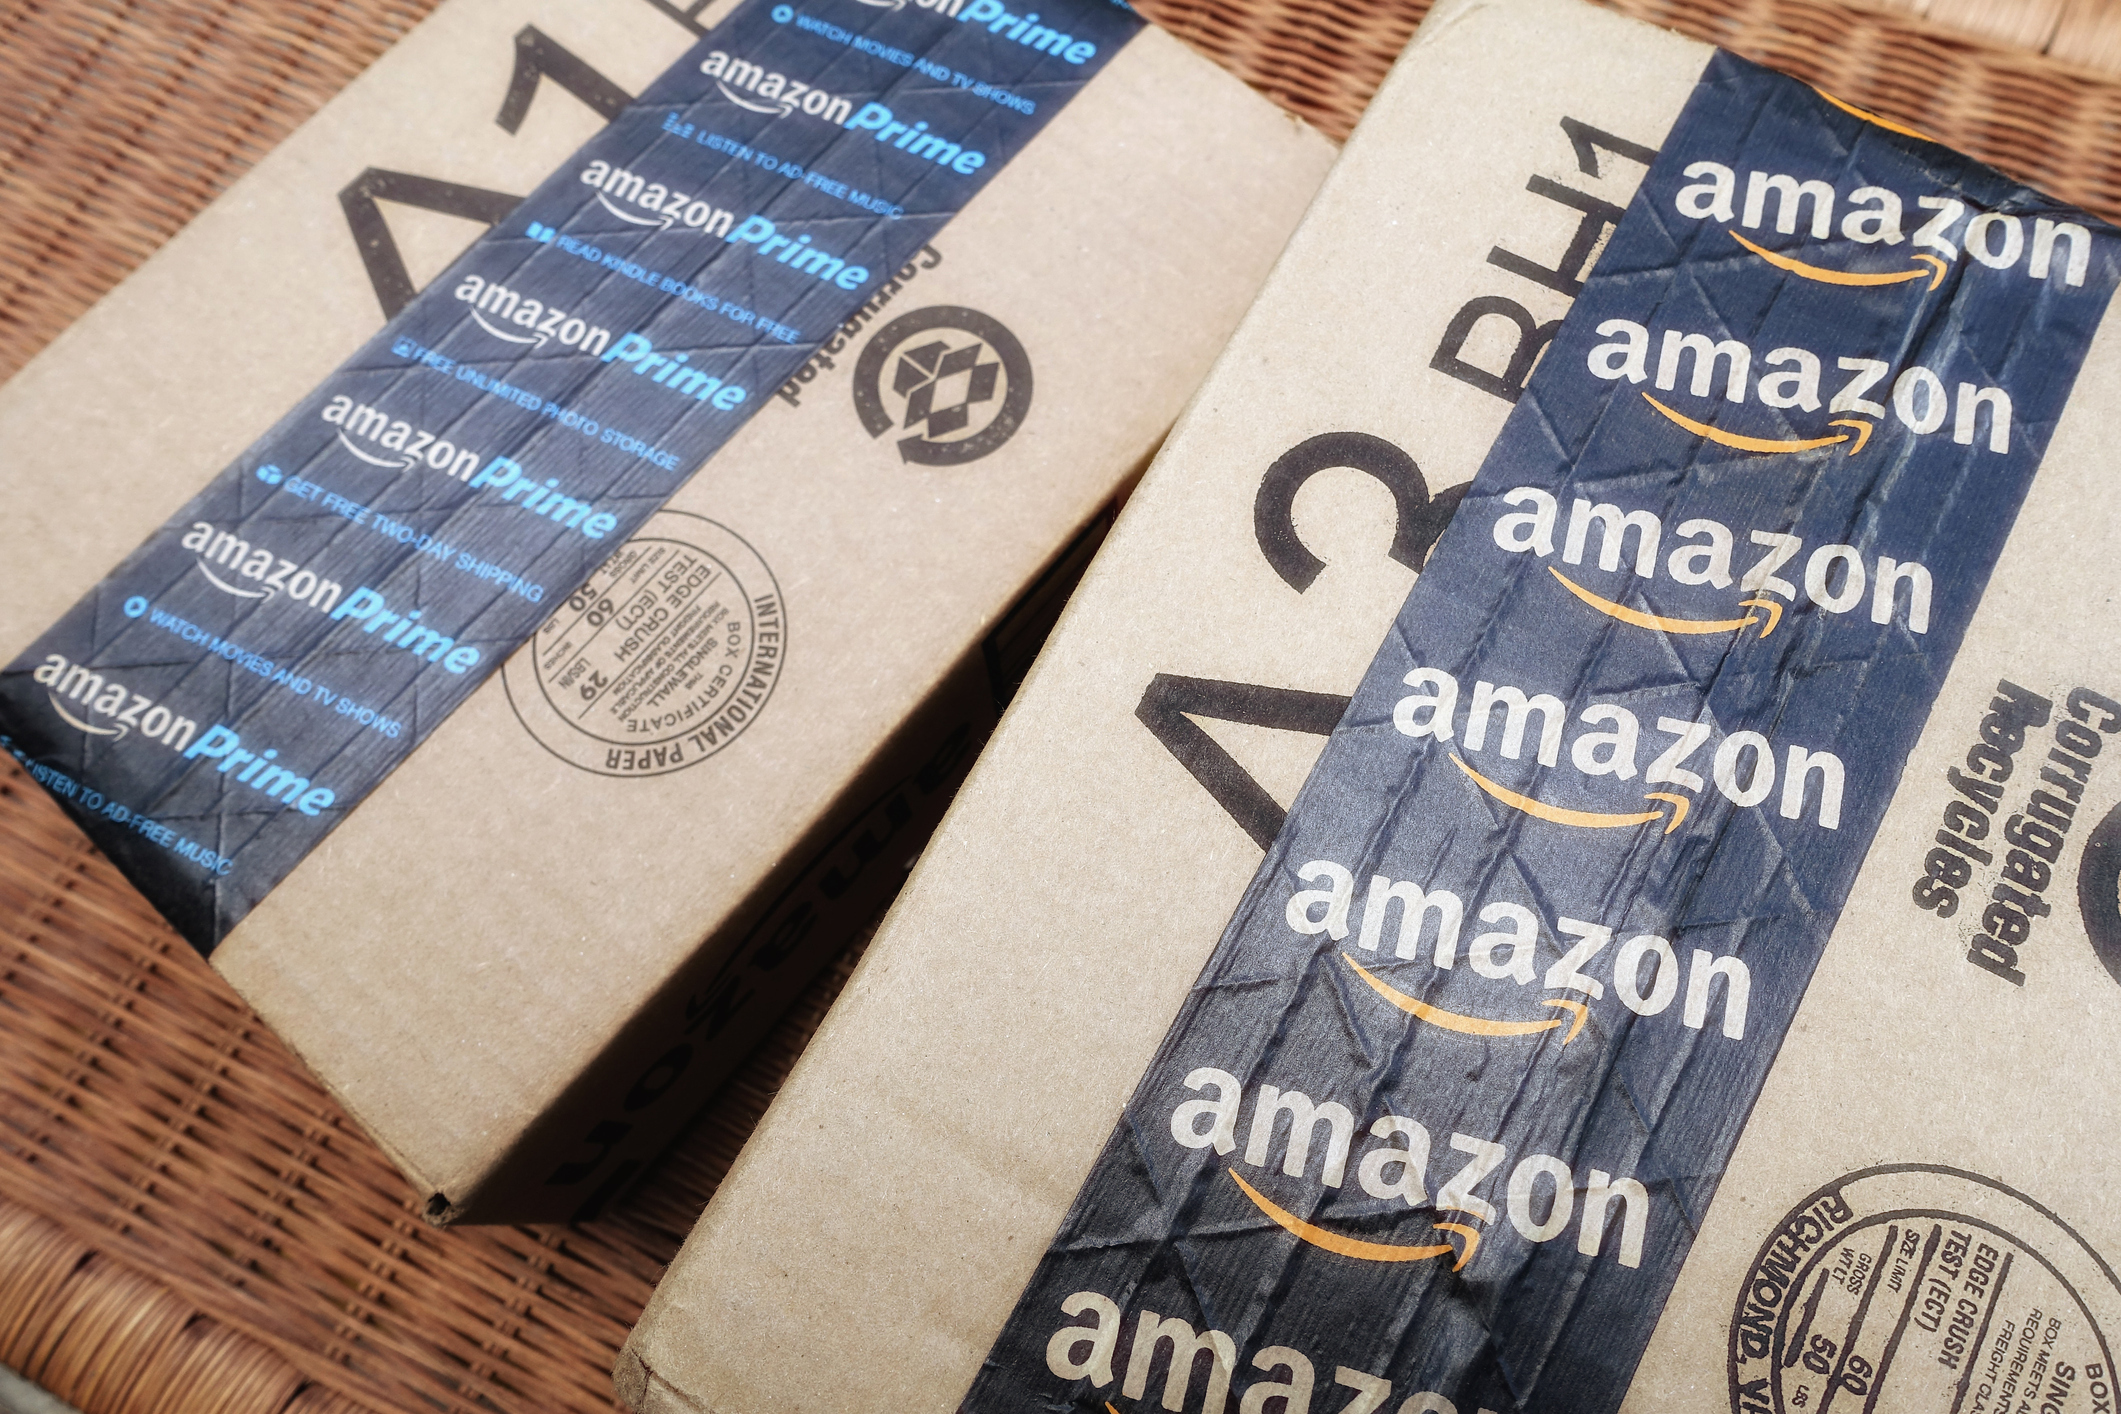 amazon boxes taped with amazon tape